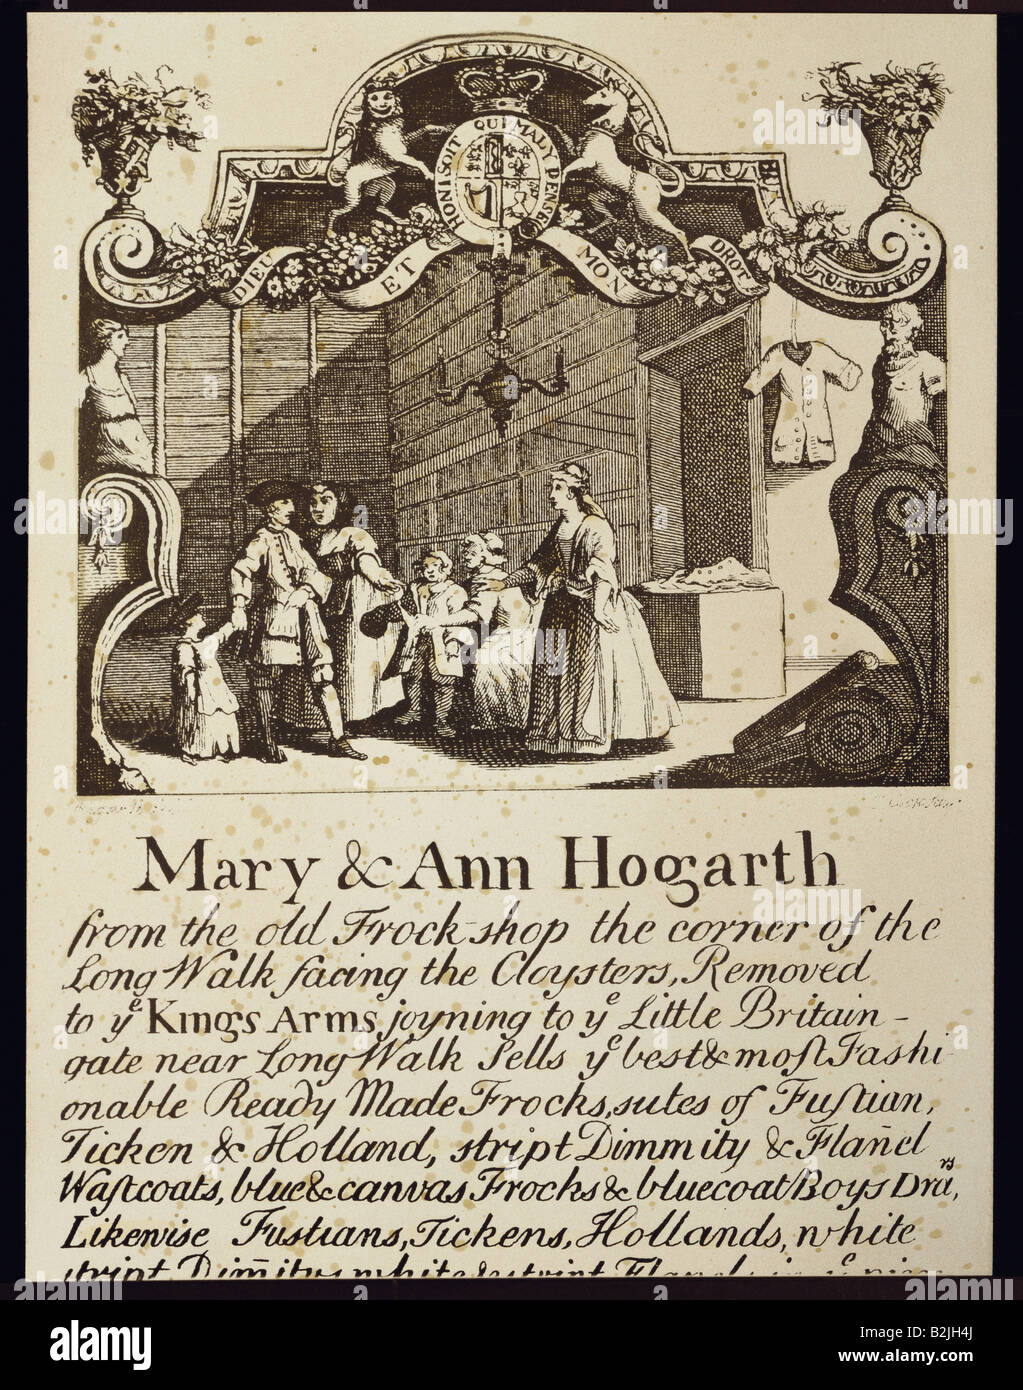 advertising, fashion, fashion store, business card of Mary and Ann Hogarth for their fabric and haberdashery shop, copper engraving, 17.1 cm x 12.1 cm, design by William Hogarth (1697 - 1764), engraved by T. Cook, London, circa 1730 / 1740, Stock Photo